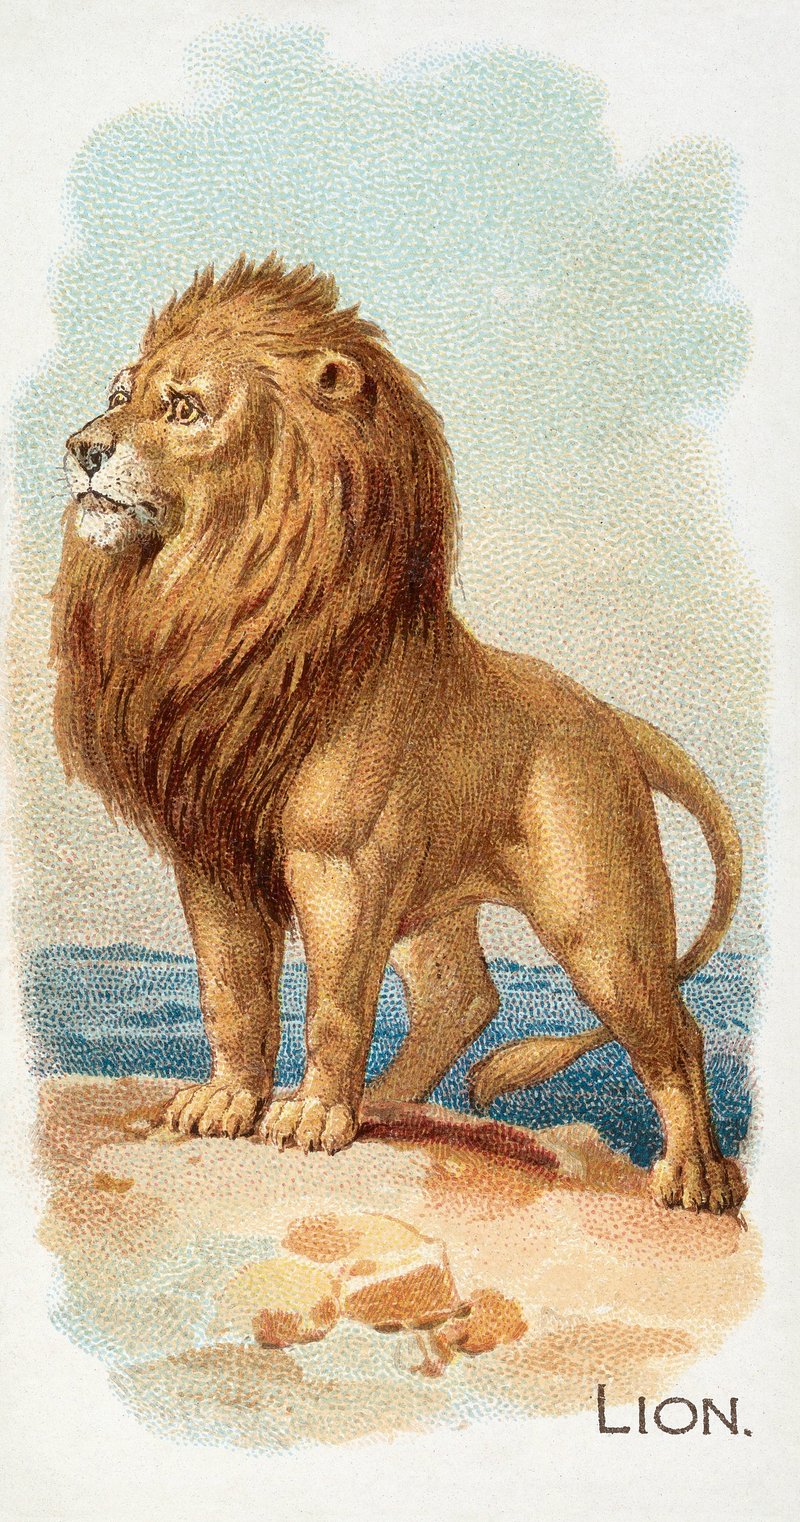 Lion Colour Pencil Drawing On Brown Stock Illustration 1456606760 |  Shutterstock